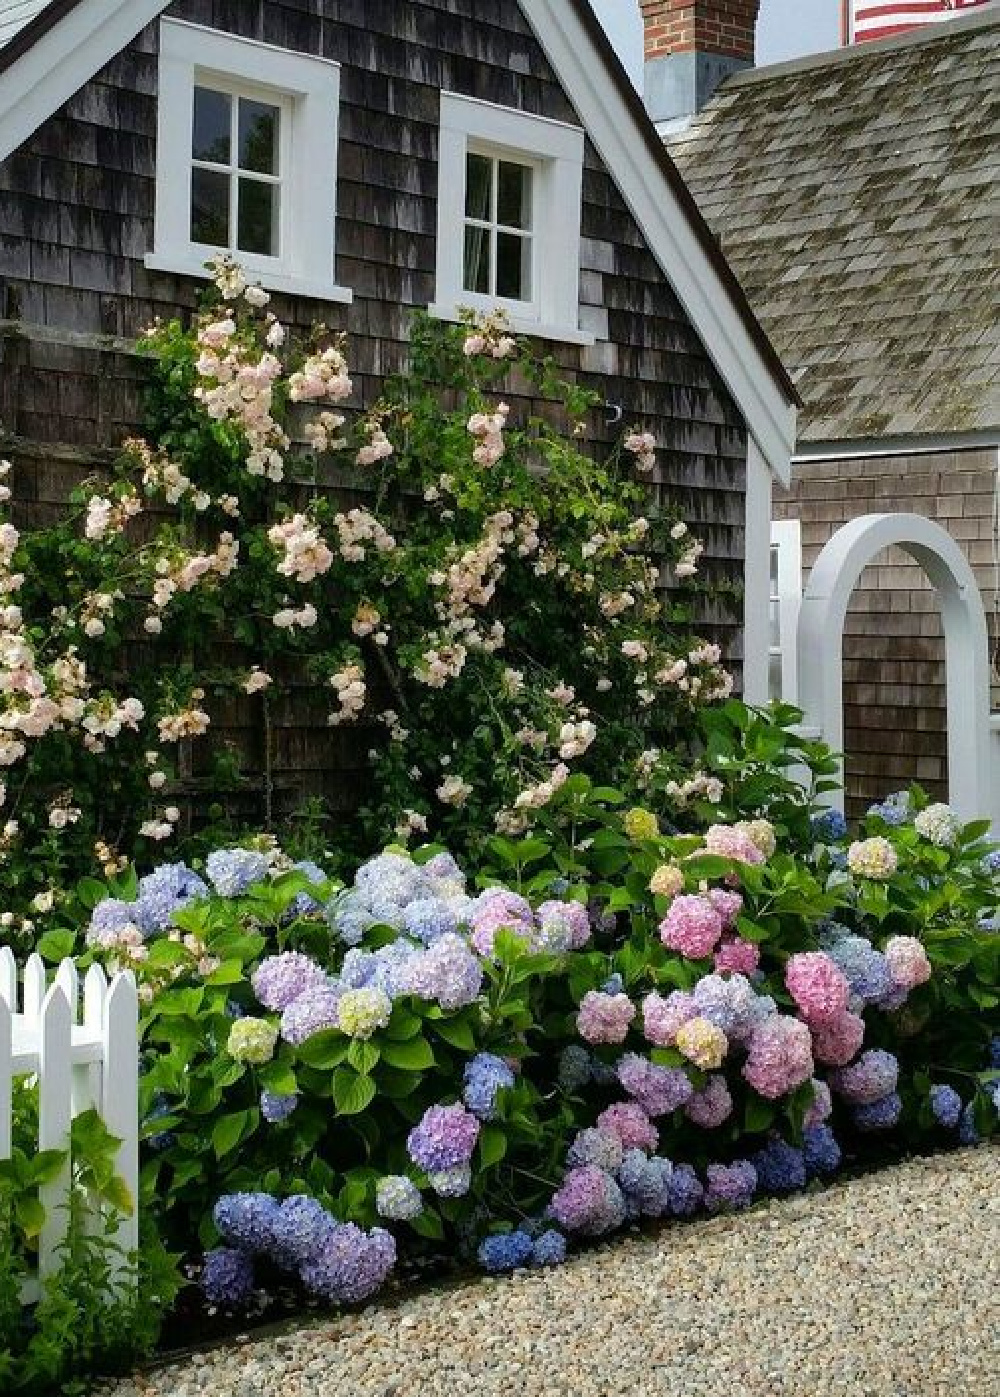 Nantucket cottage with flowers in bloom. COME TOUR MORE Nantucket Style Chic & Summer Vibes! #nantucket #interiordesign #designinspiration #summerliving #coastalstyle